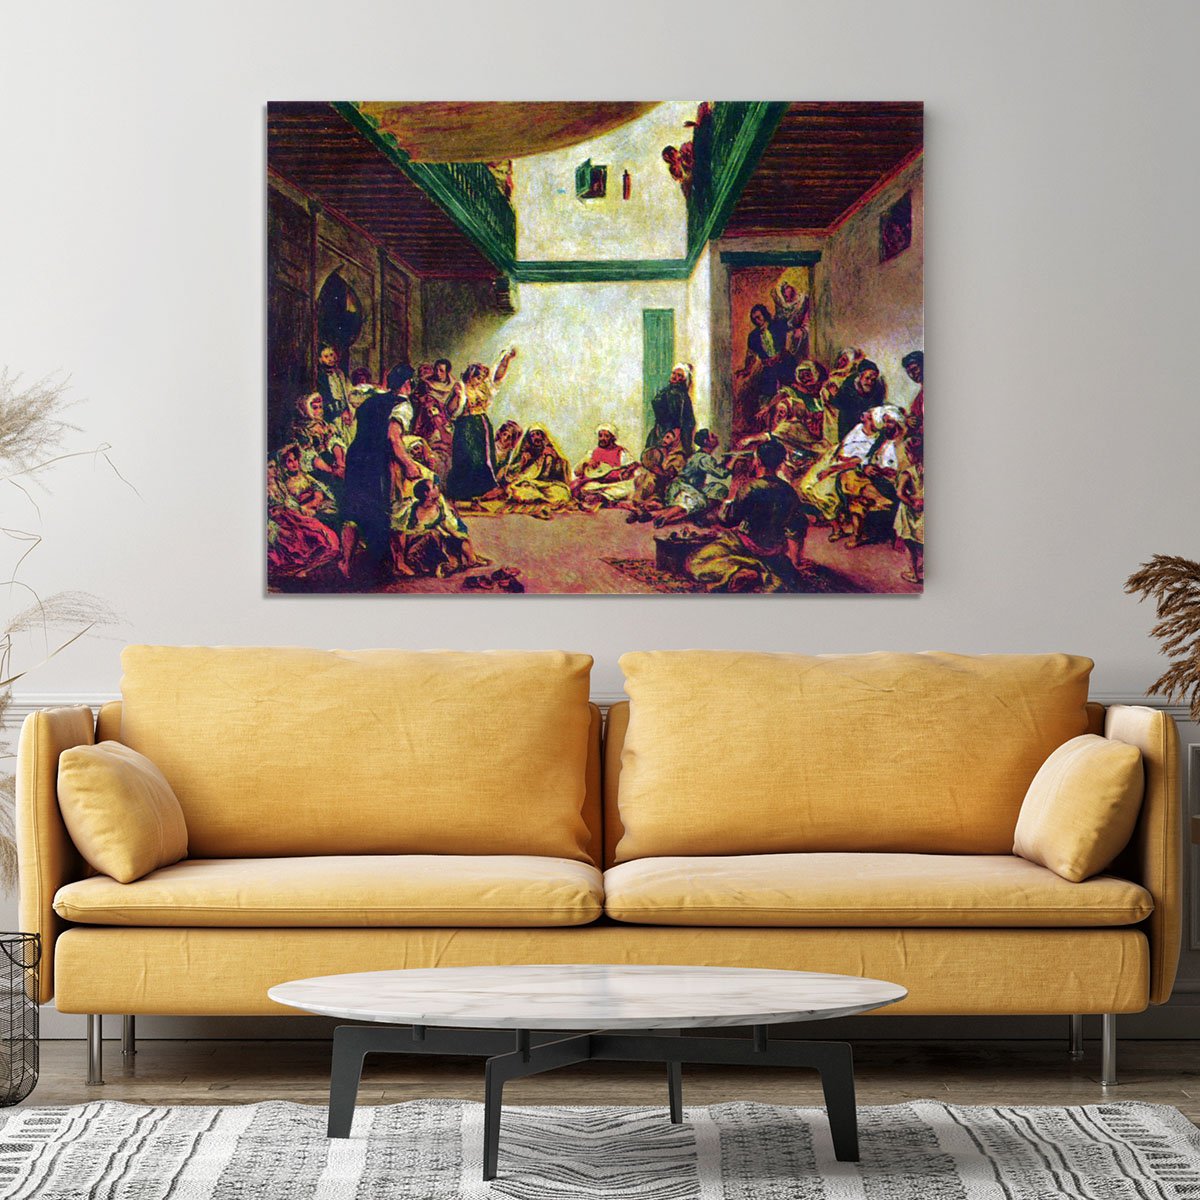 Jewish wedding after Delacroix by Renoir Canvas Print or Poster